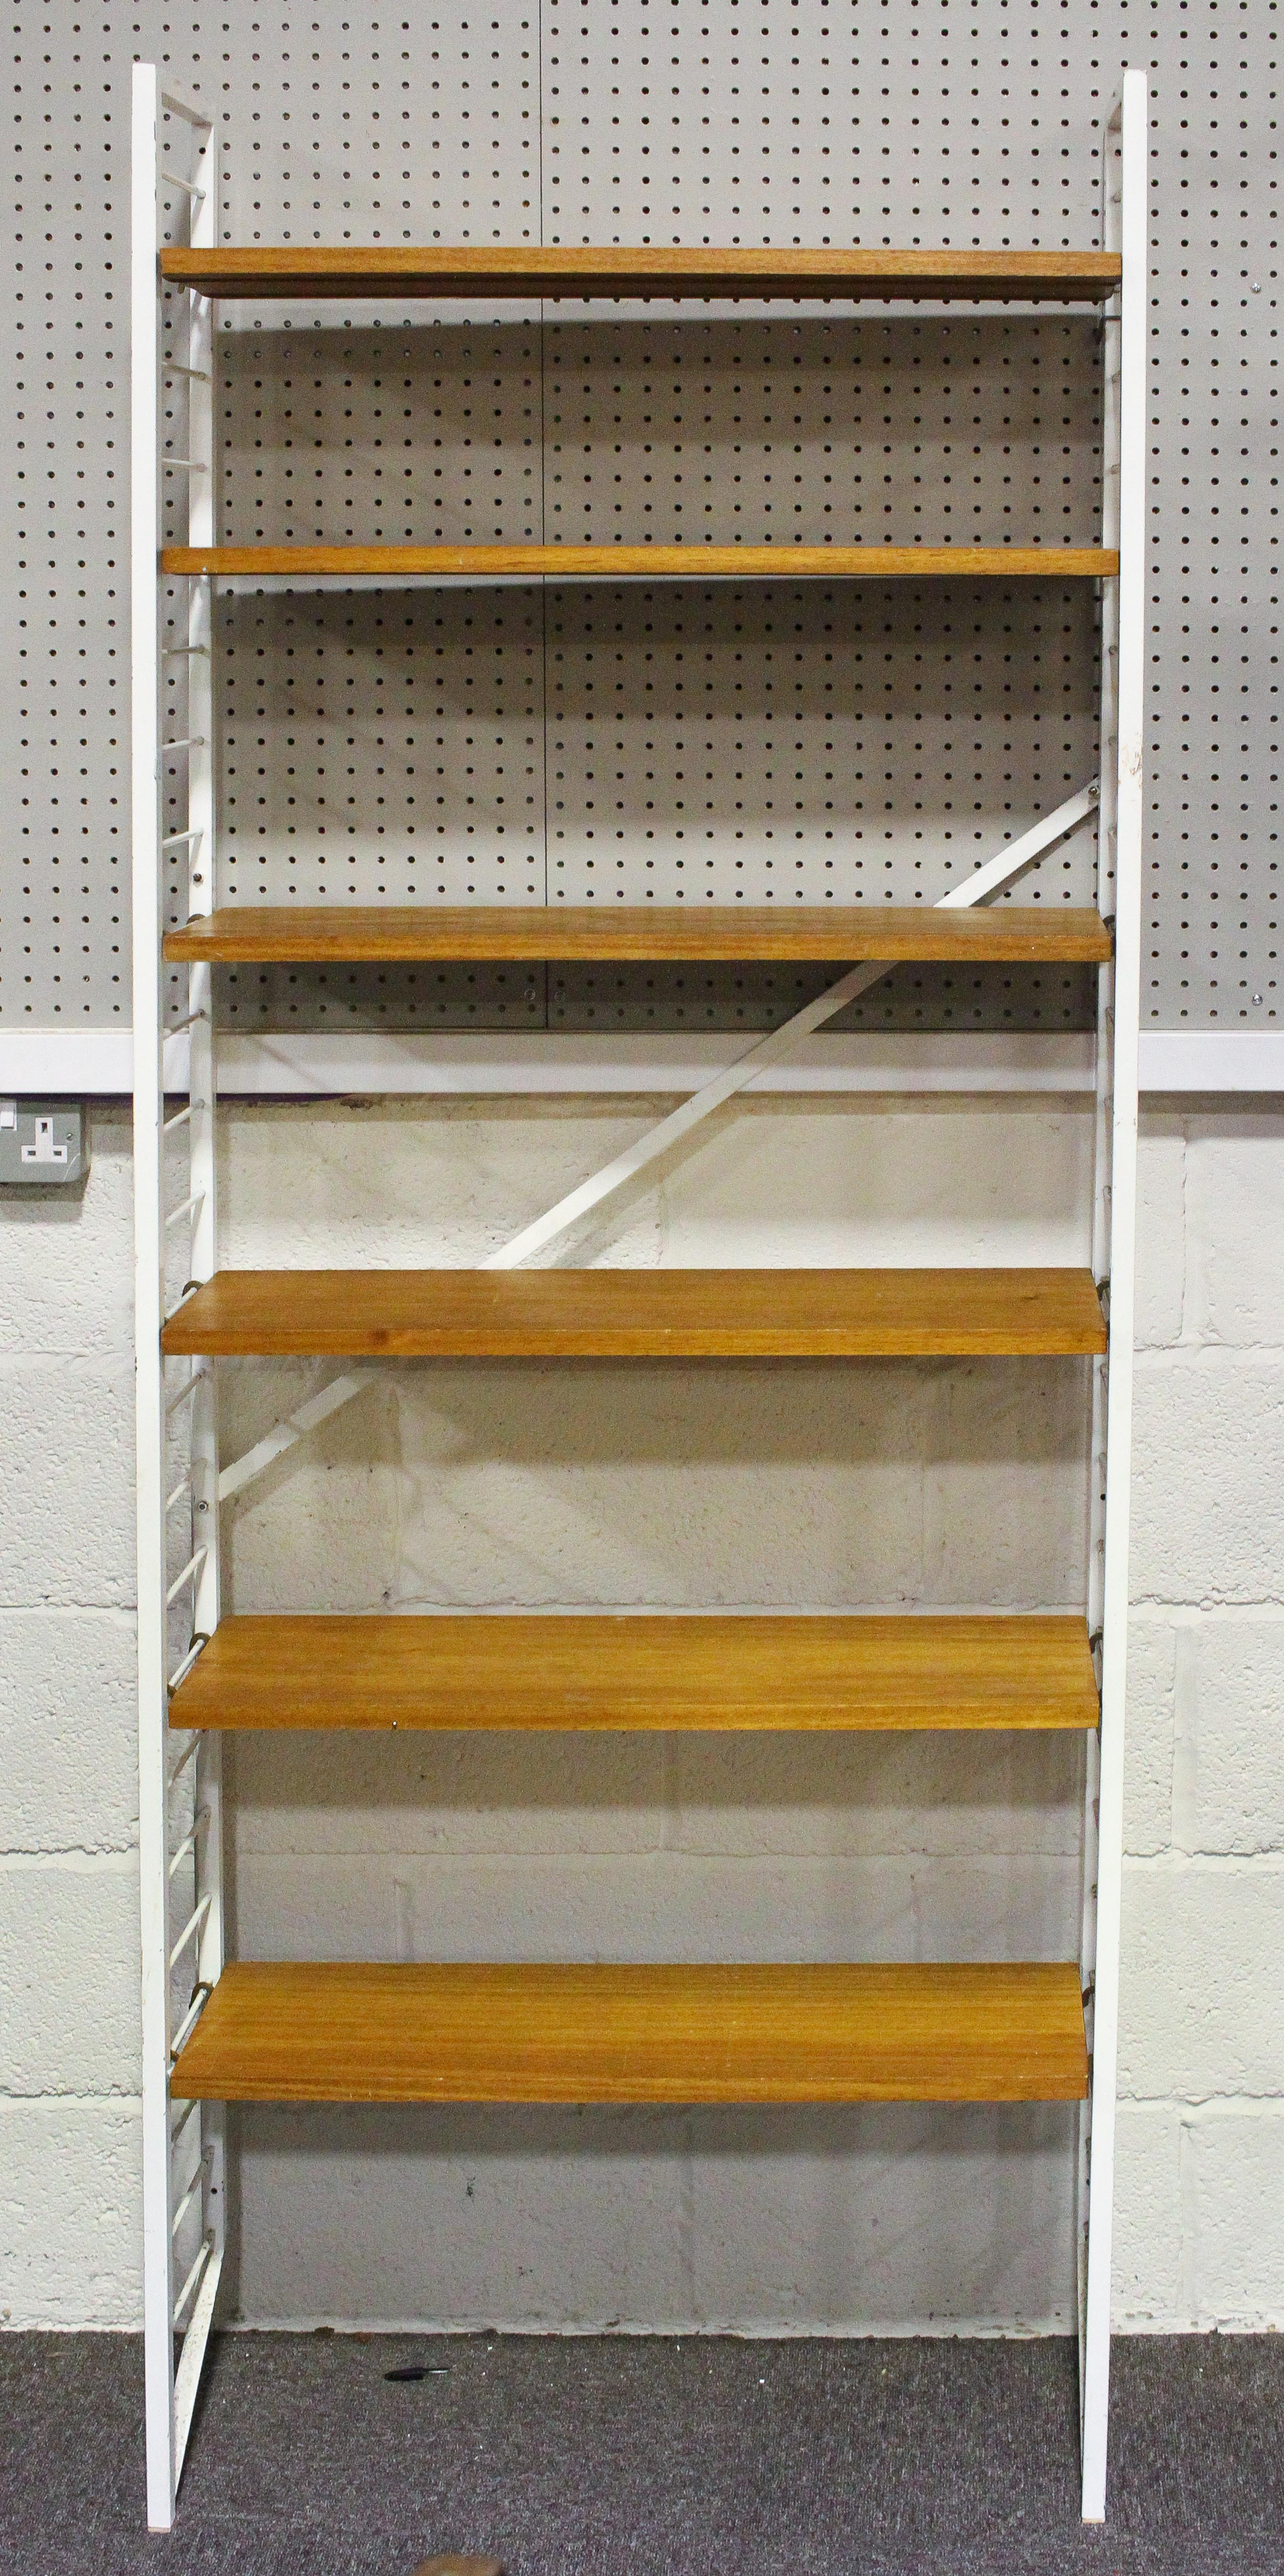 A set of Staples Ladderax shelving unit with white ladder supports and six teak shelves, - Image 2 of 2